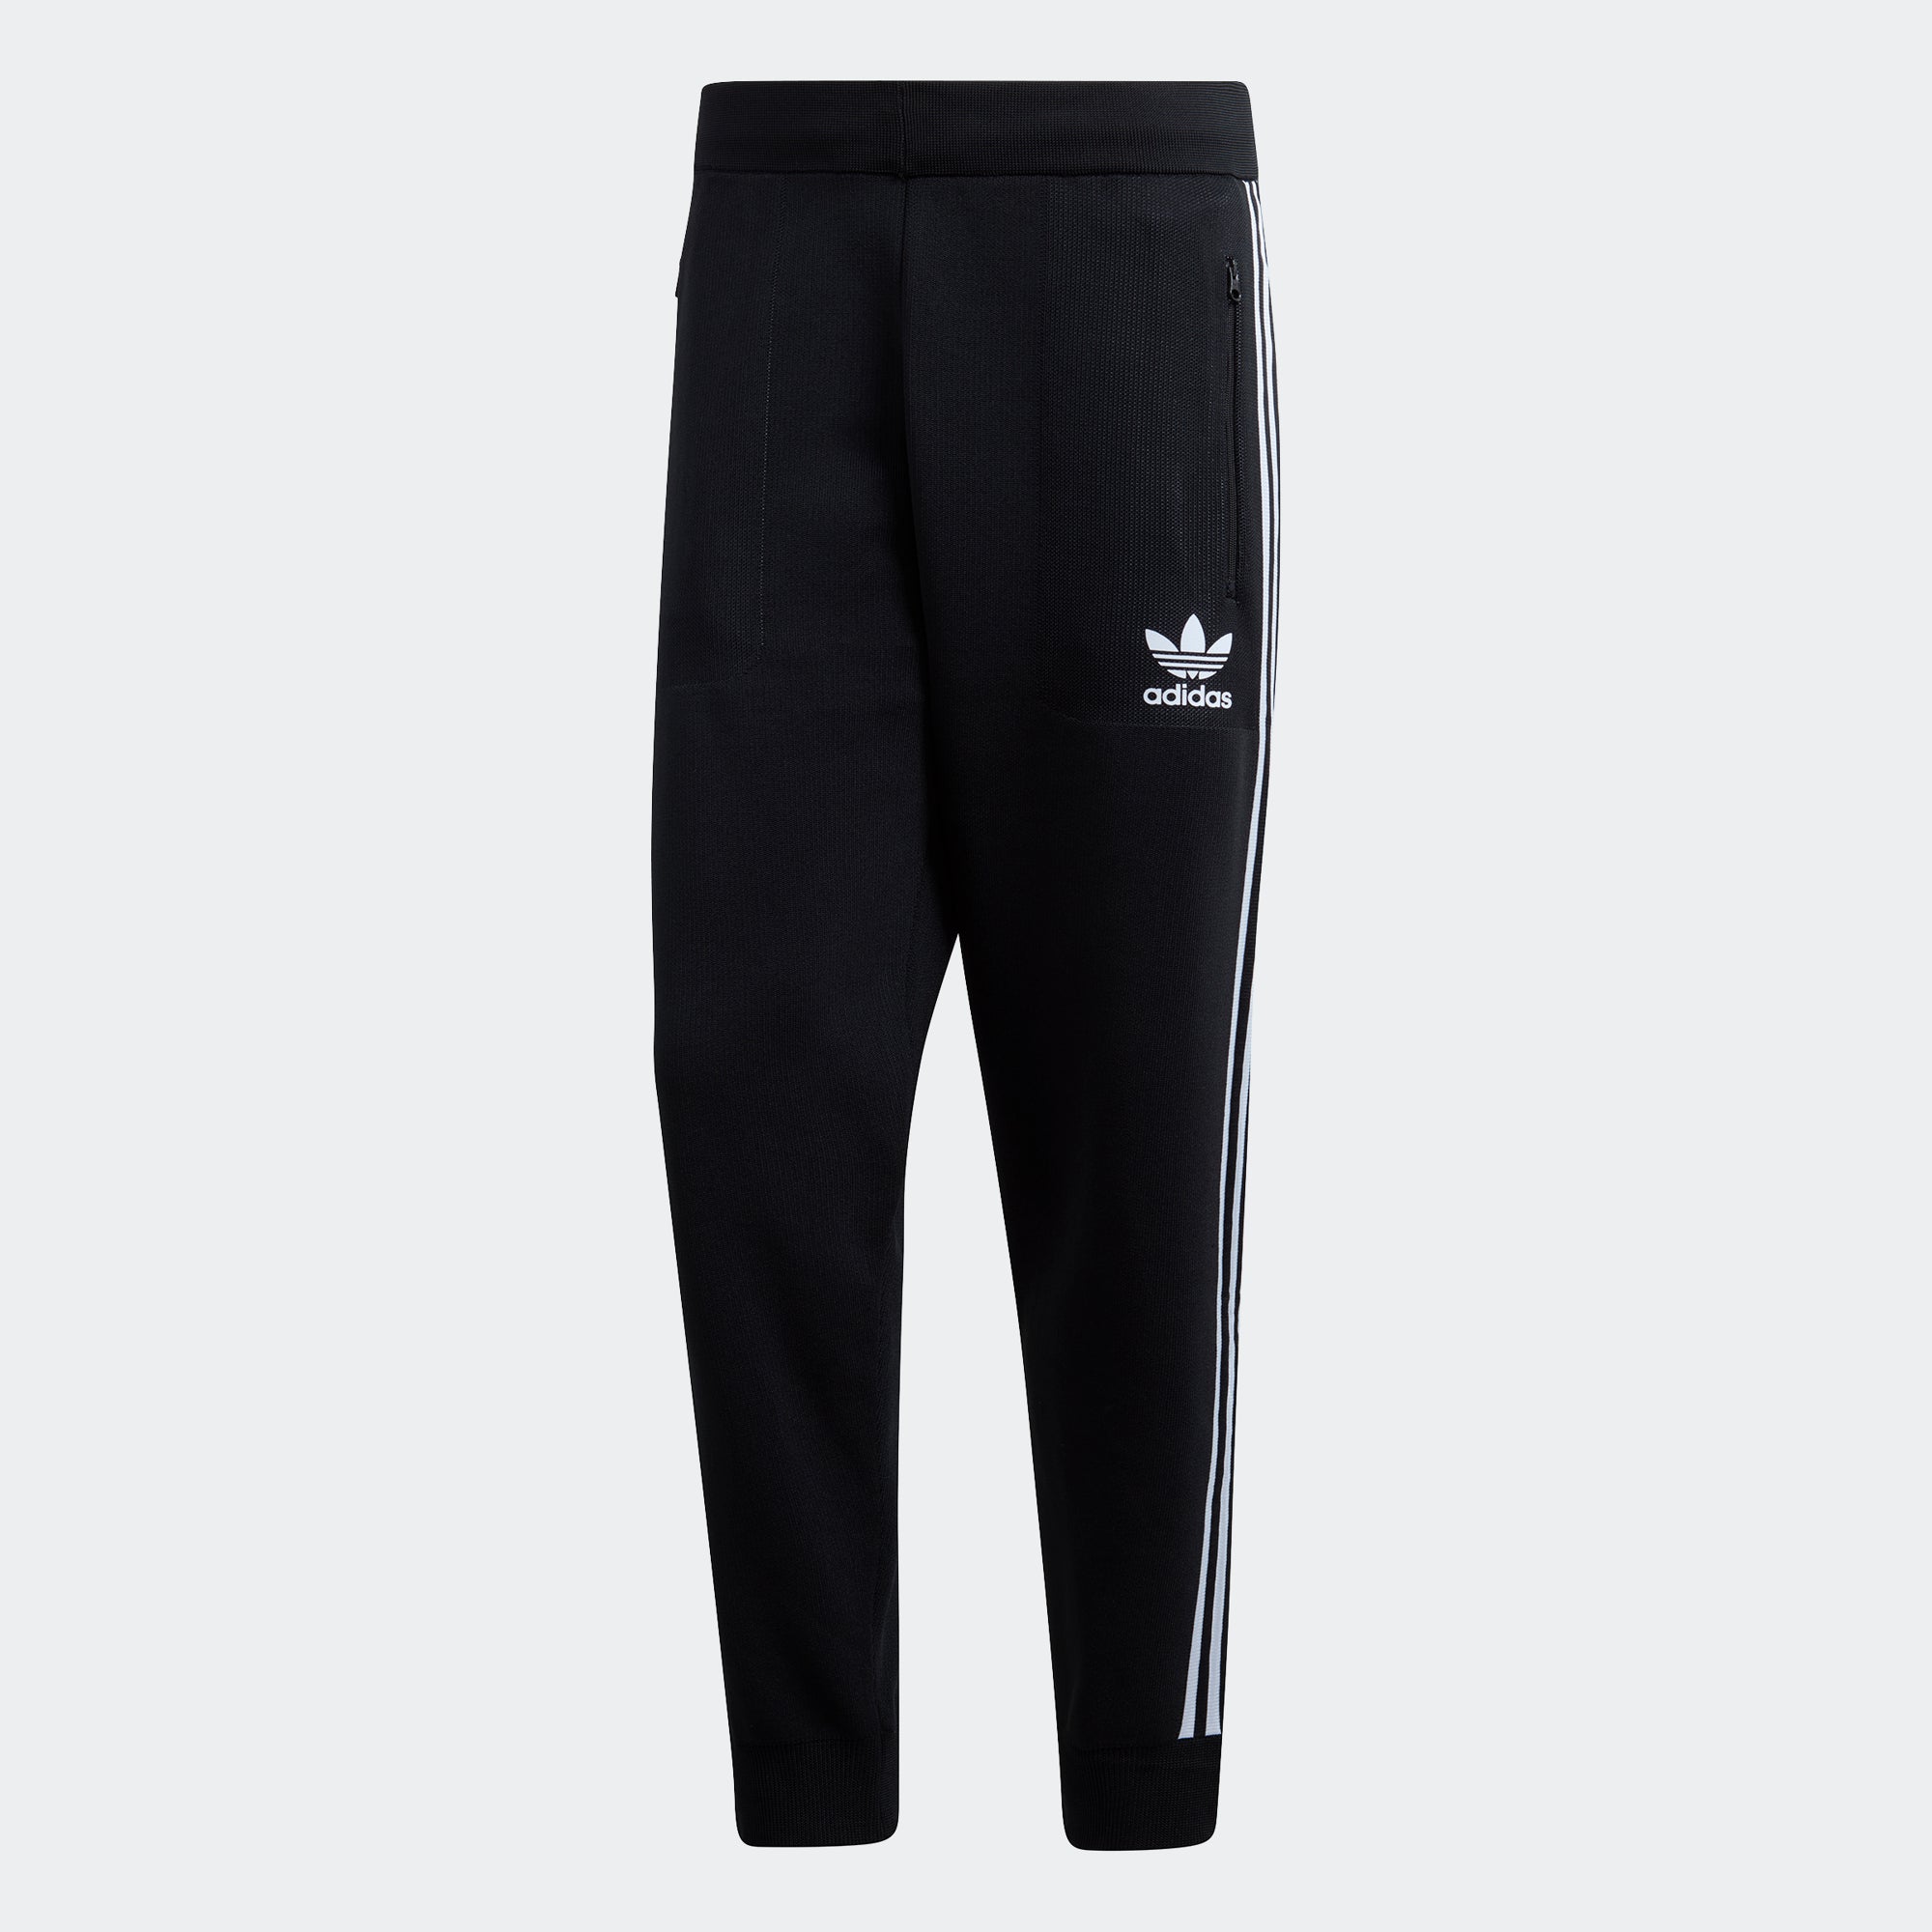 jogger pants with polo